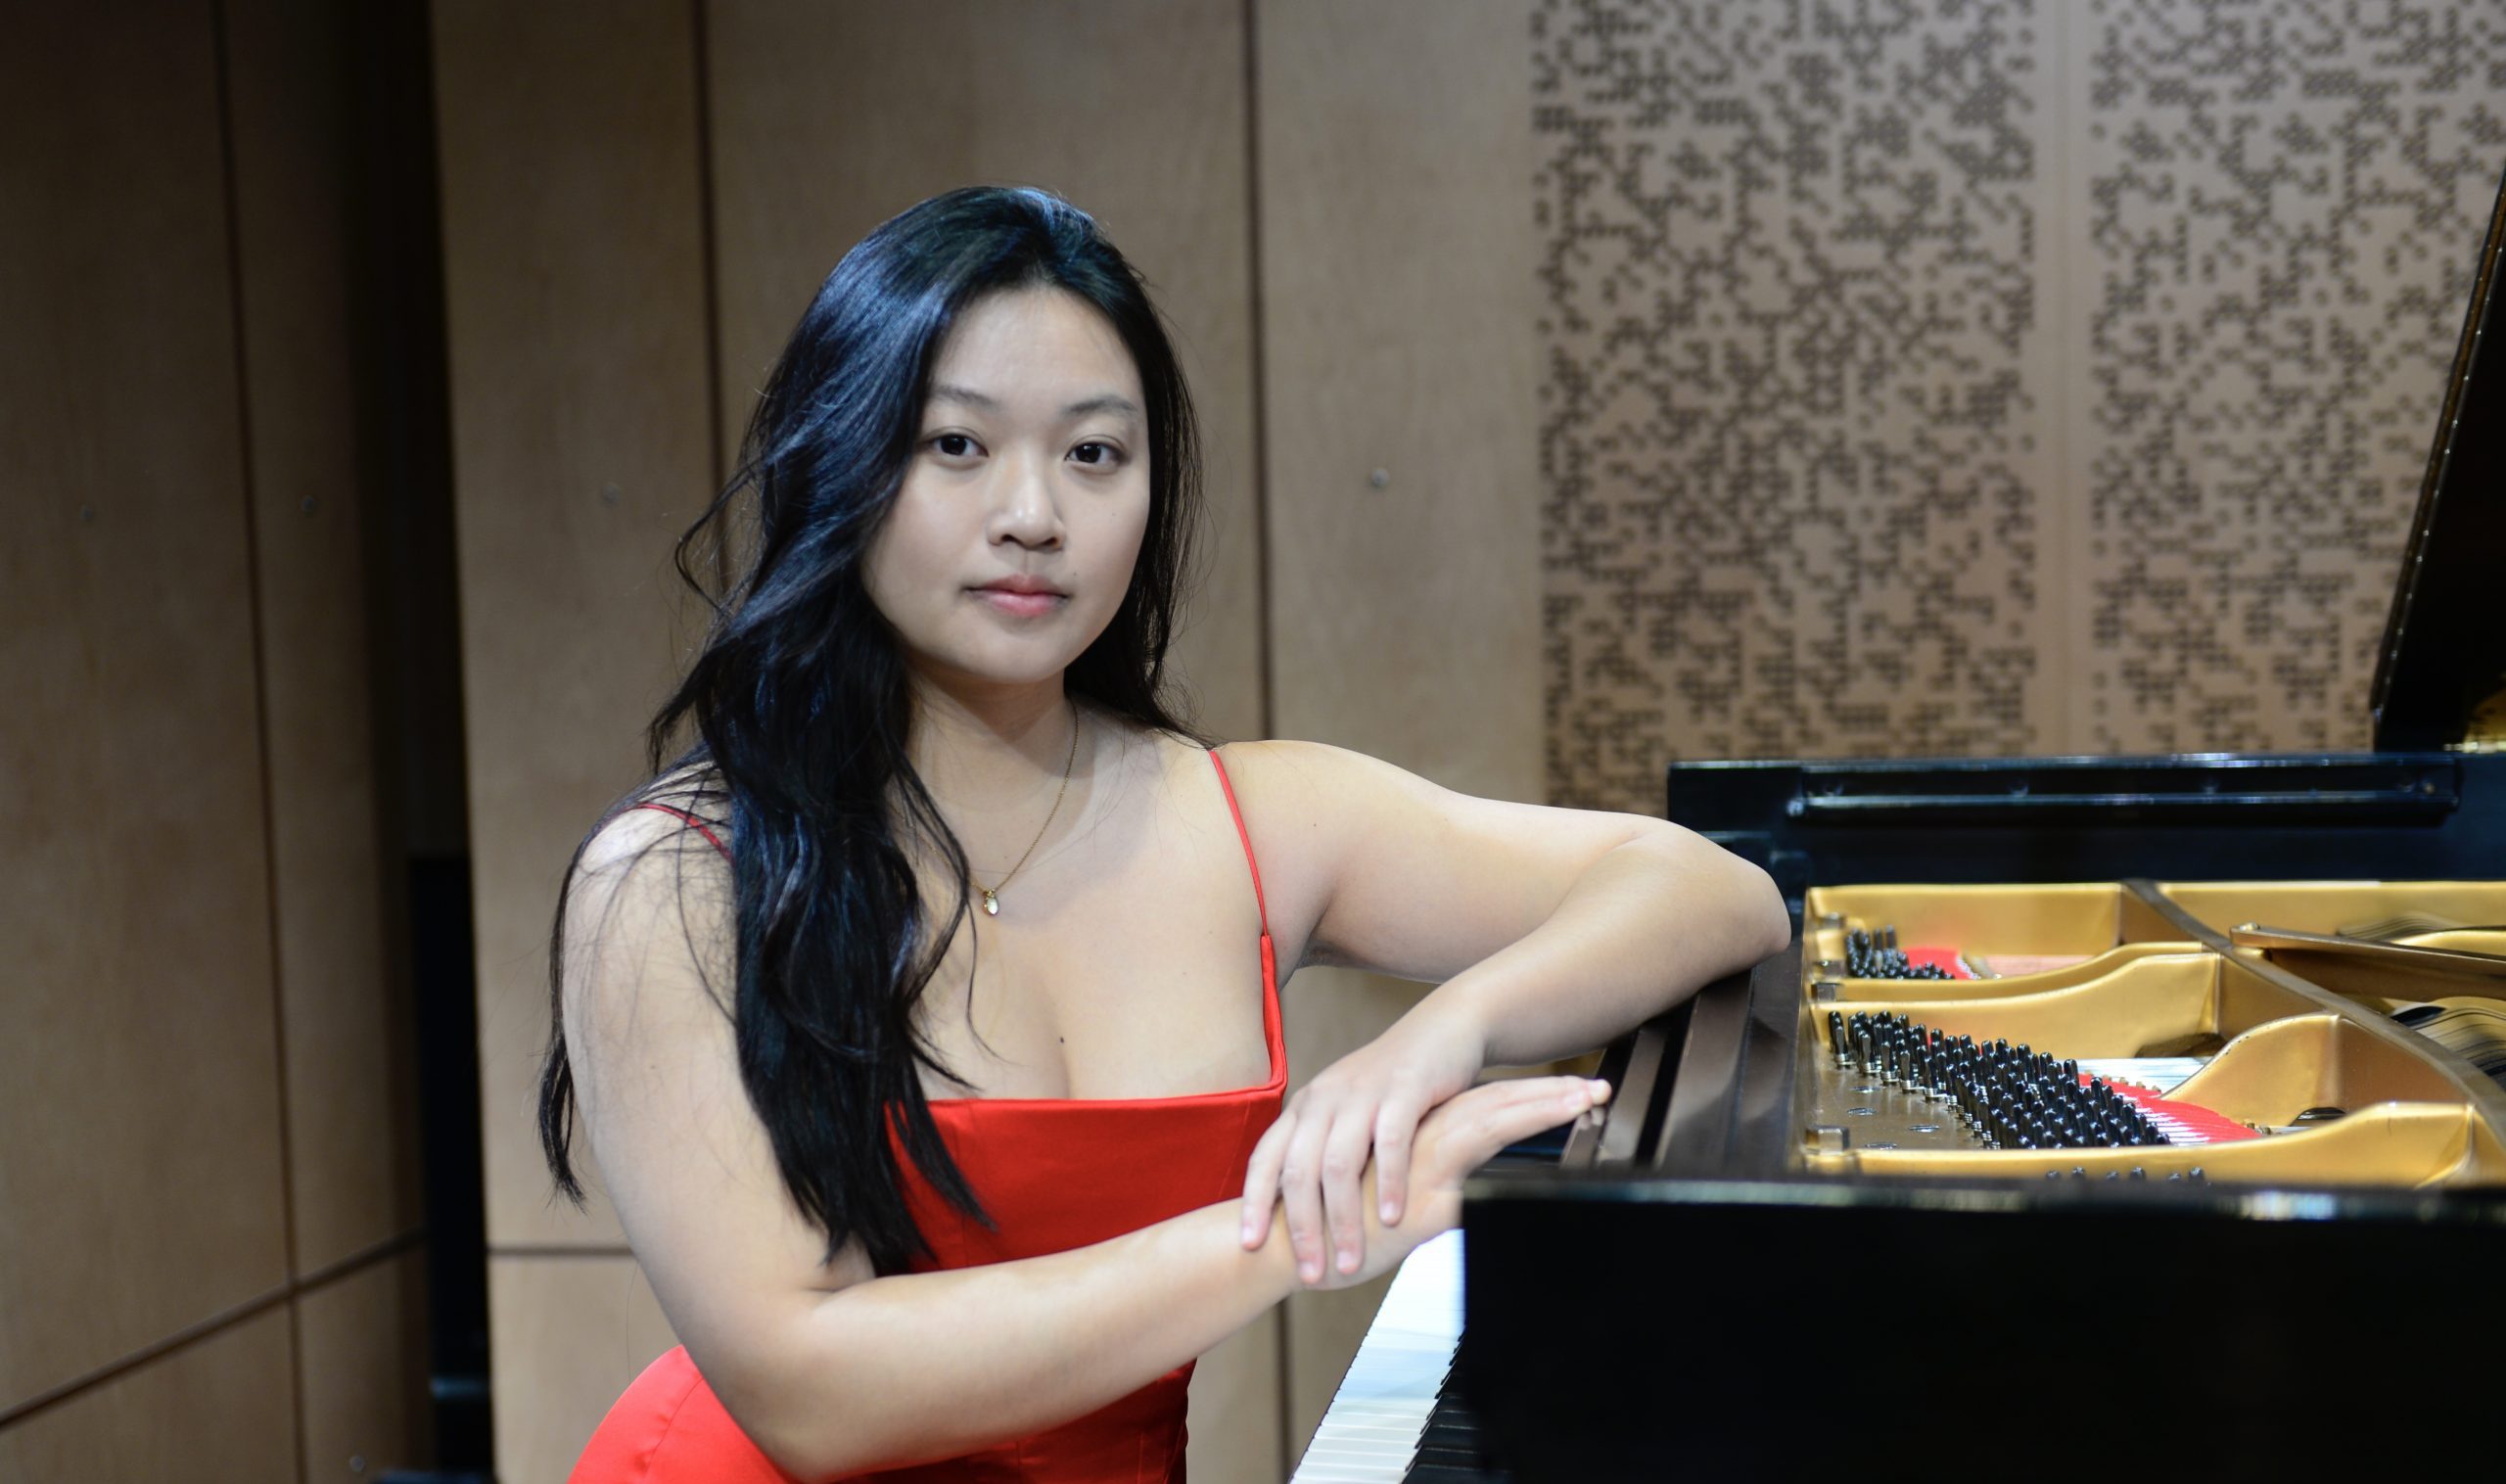 The Selma Moidel Smith Recital Featuring Phyllis Pan